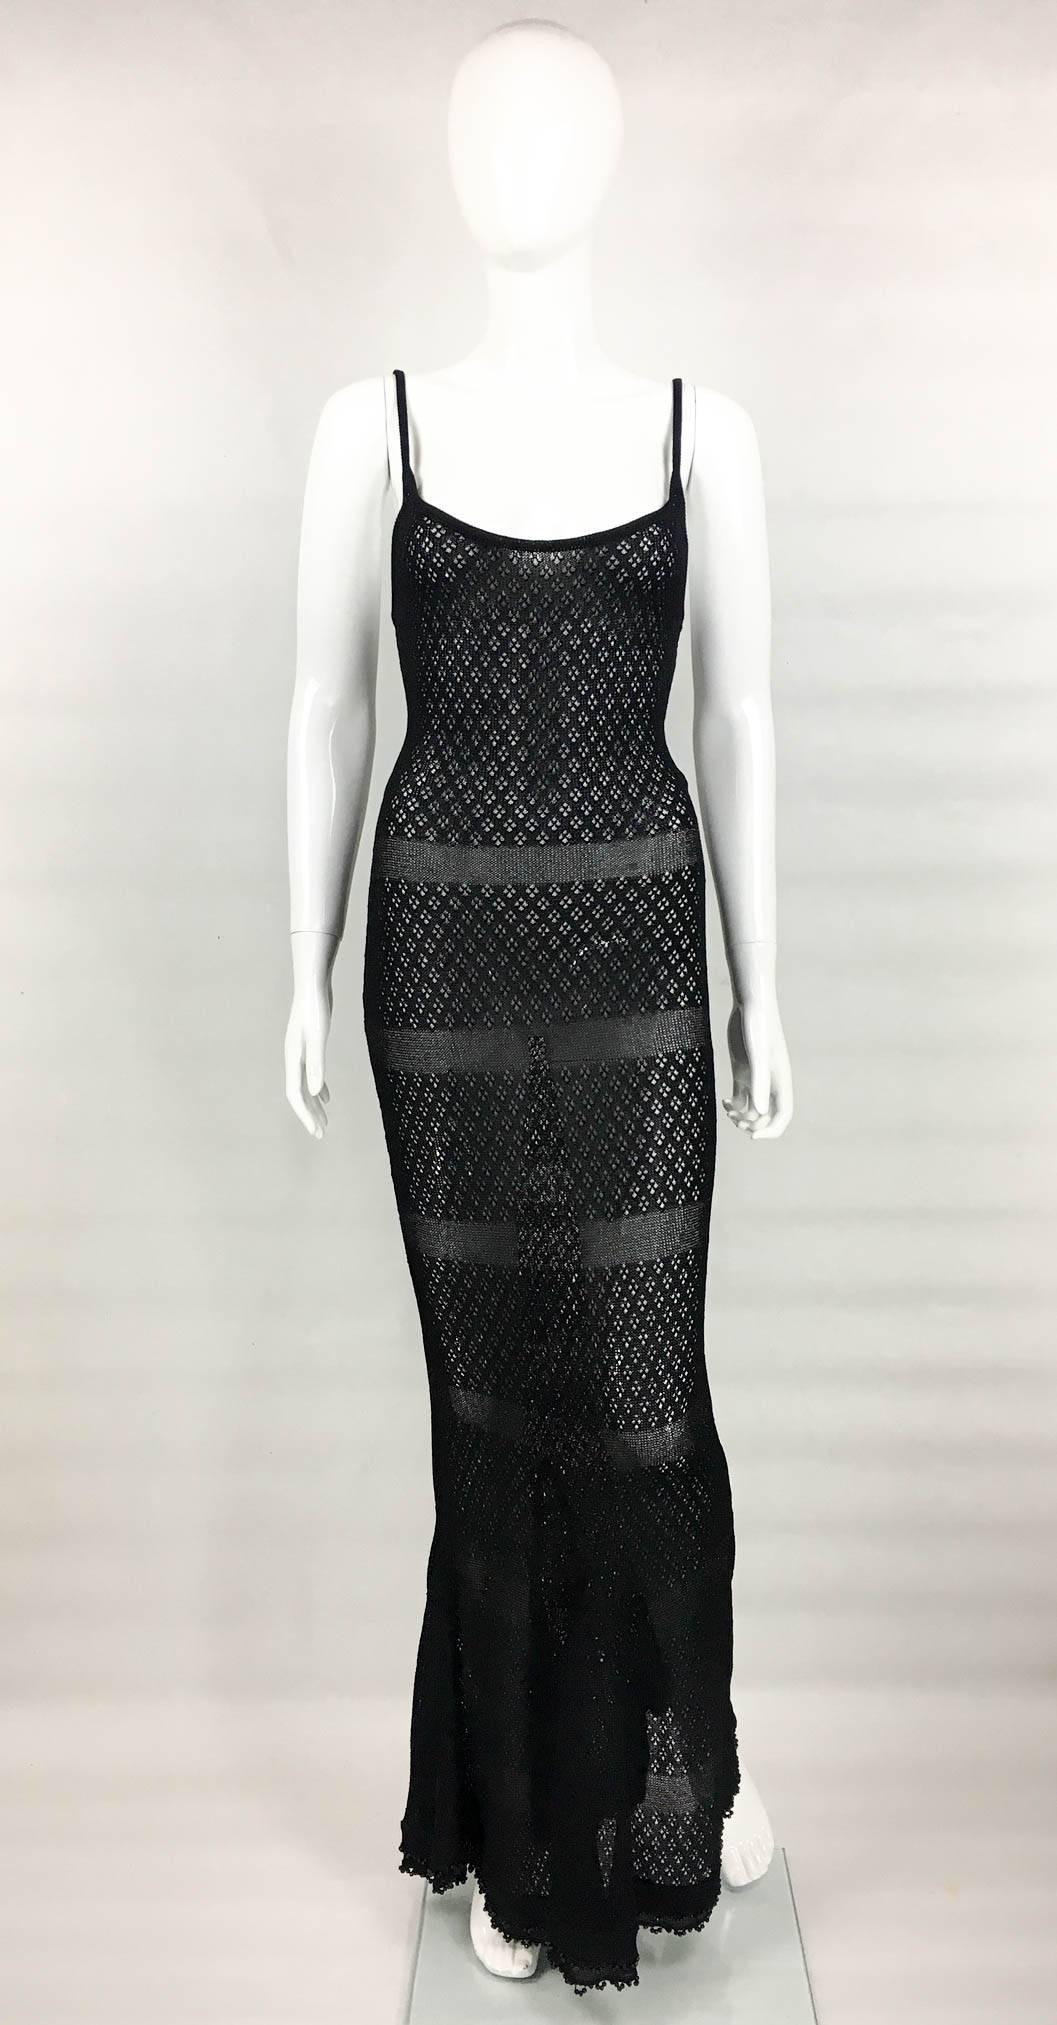 Important Chanel Knitted Sheer Maxi Dress. This fabulous piece for designed for the Spring/Summer 1995 collection. This figure hugging long dress is made of a cotton knit and lurex horizontal stripes. The bottom of the dress flares out, due to the